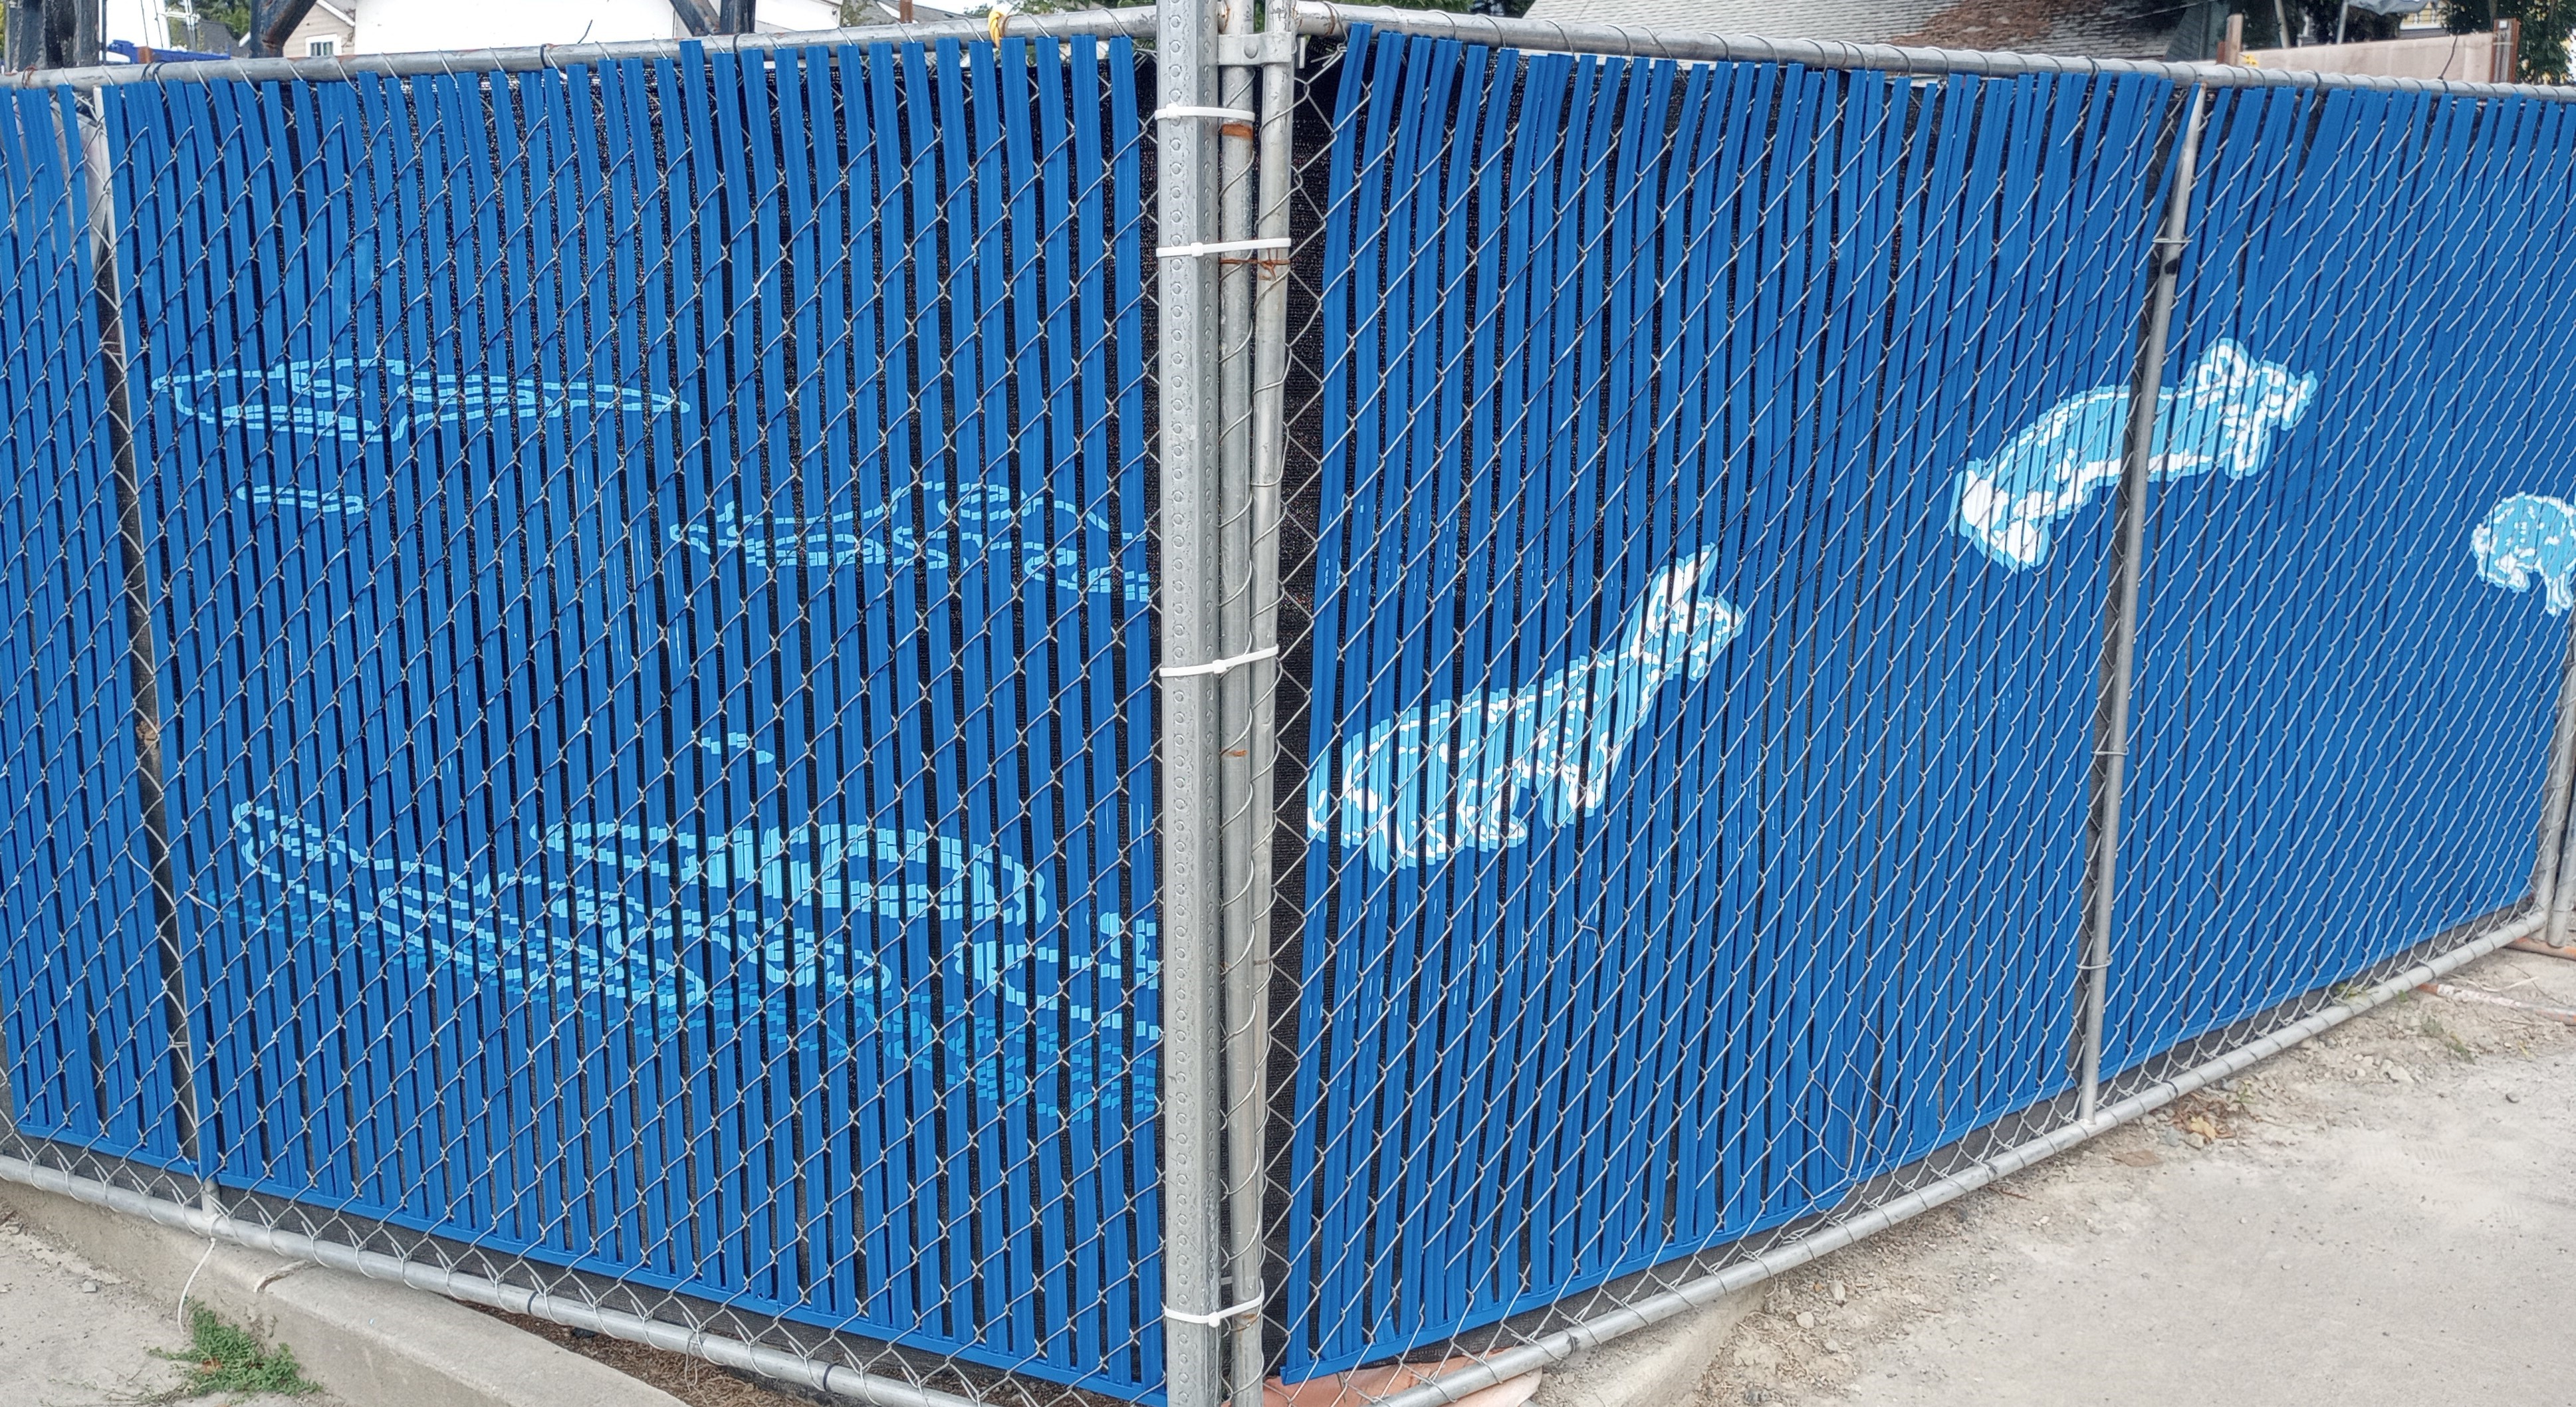  Blue inserts woven into a chainmail fence, with a mural of clouds painted on one side and an illustration of a corgi in mid-jump on the other.